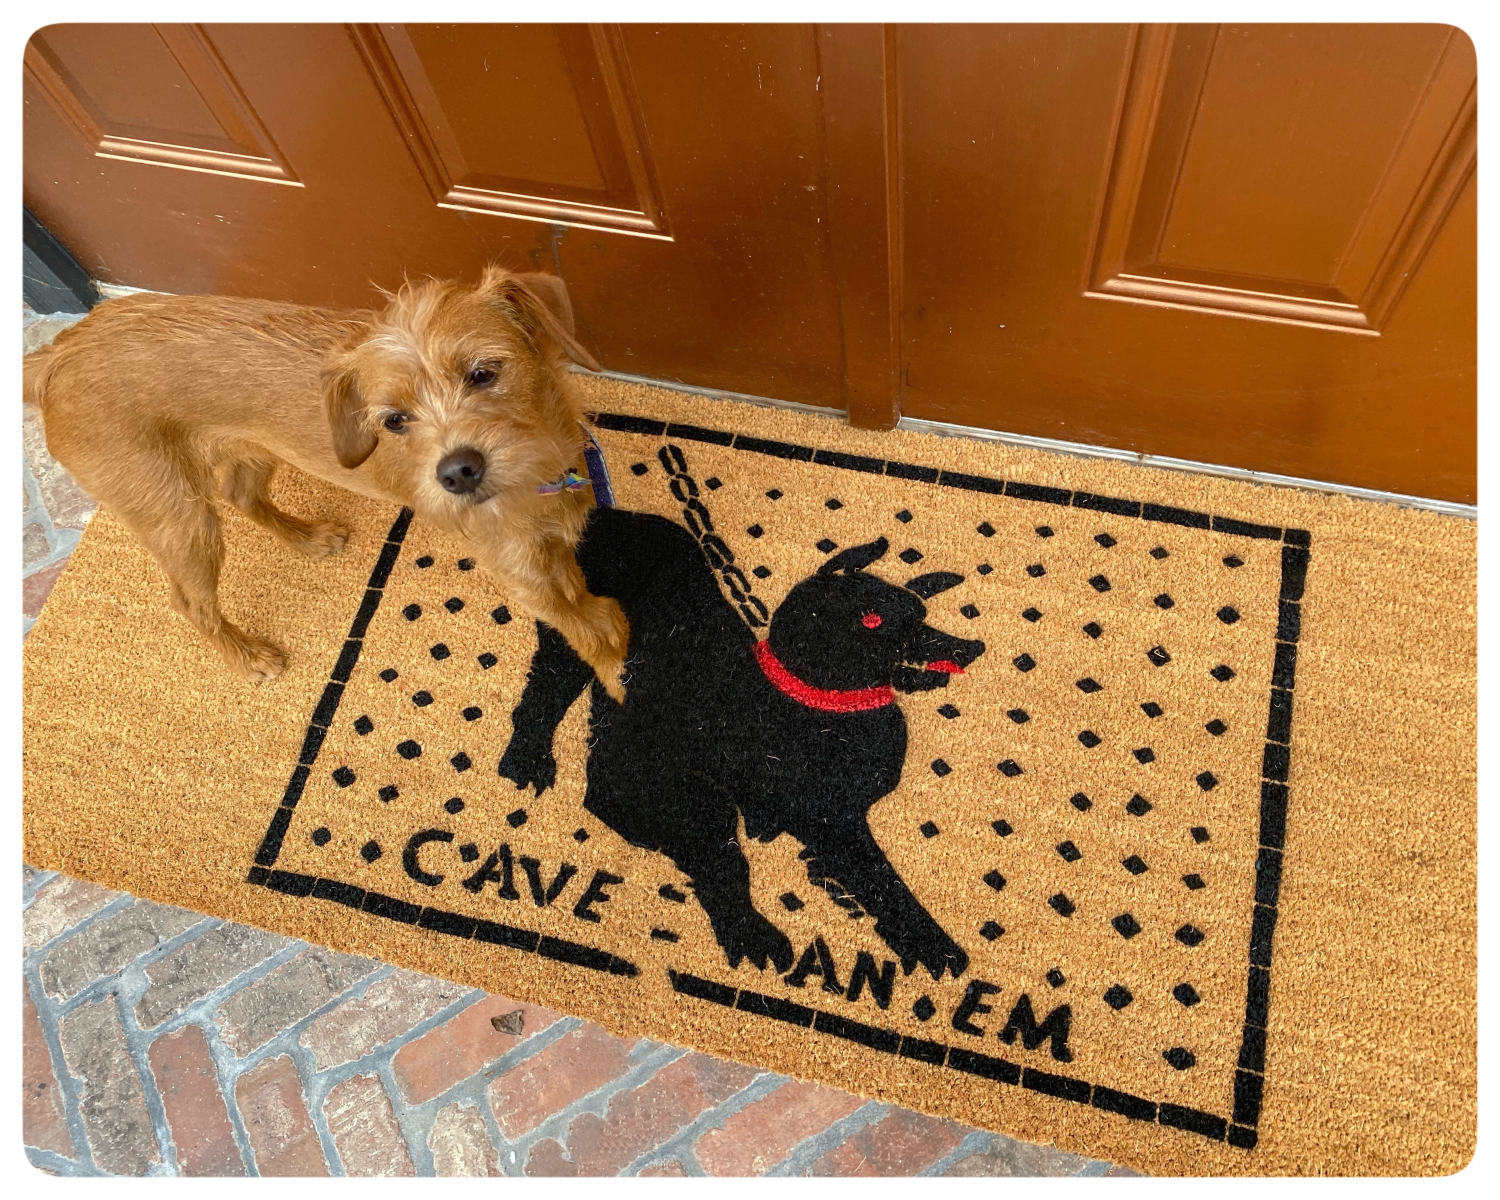 Tammy Sandwiches the rescue dog Terrier on a doublewide extra large damn good doormat with ancient pompeii beware of dog art history nerd gift